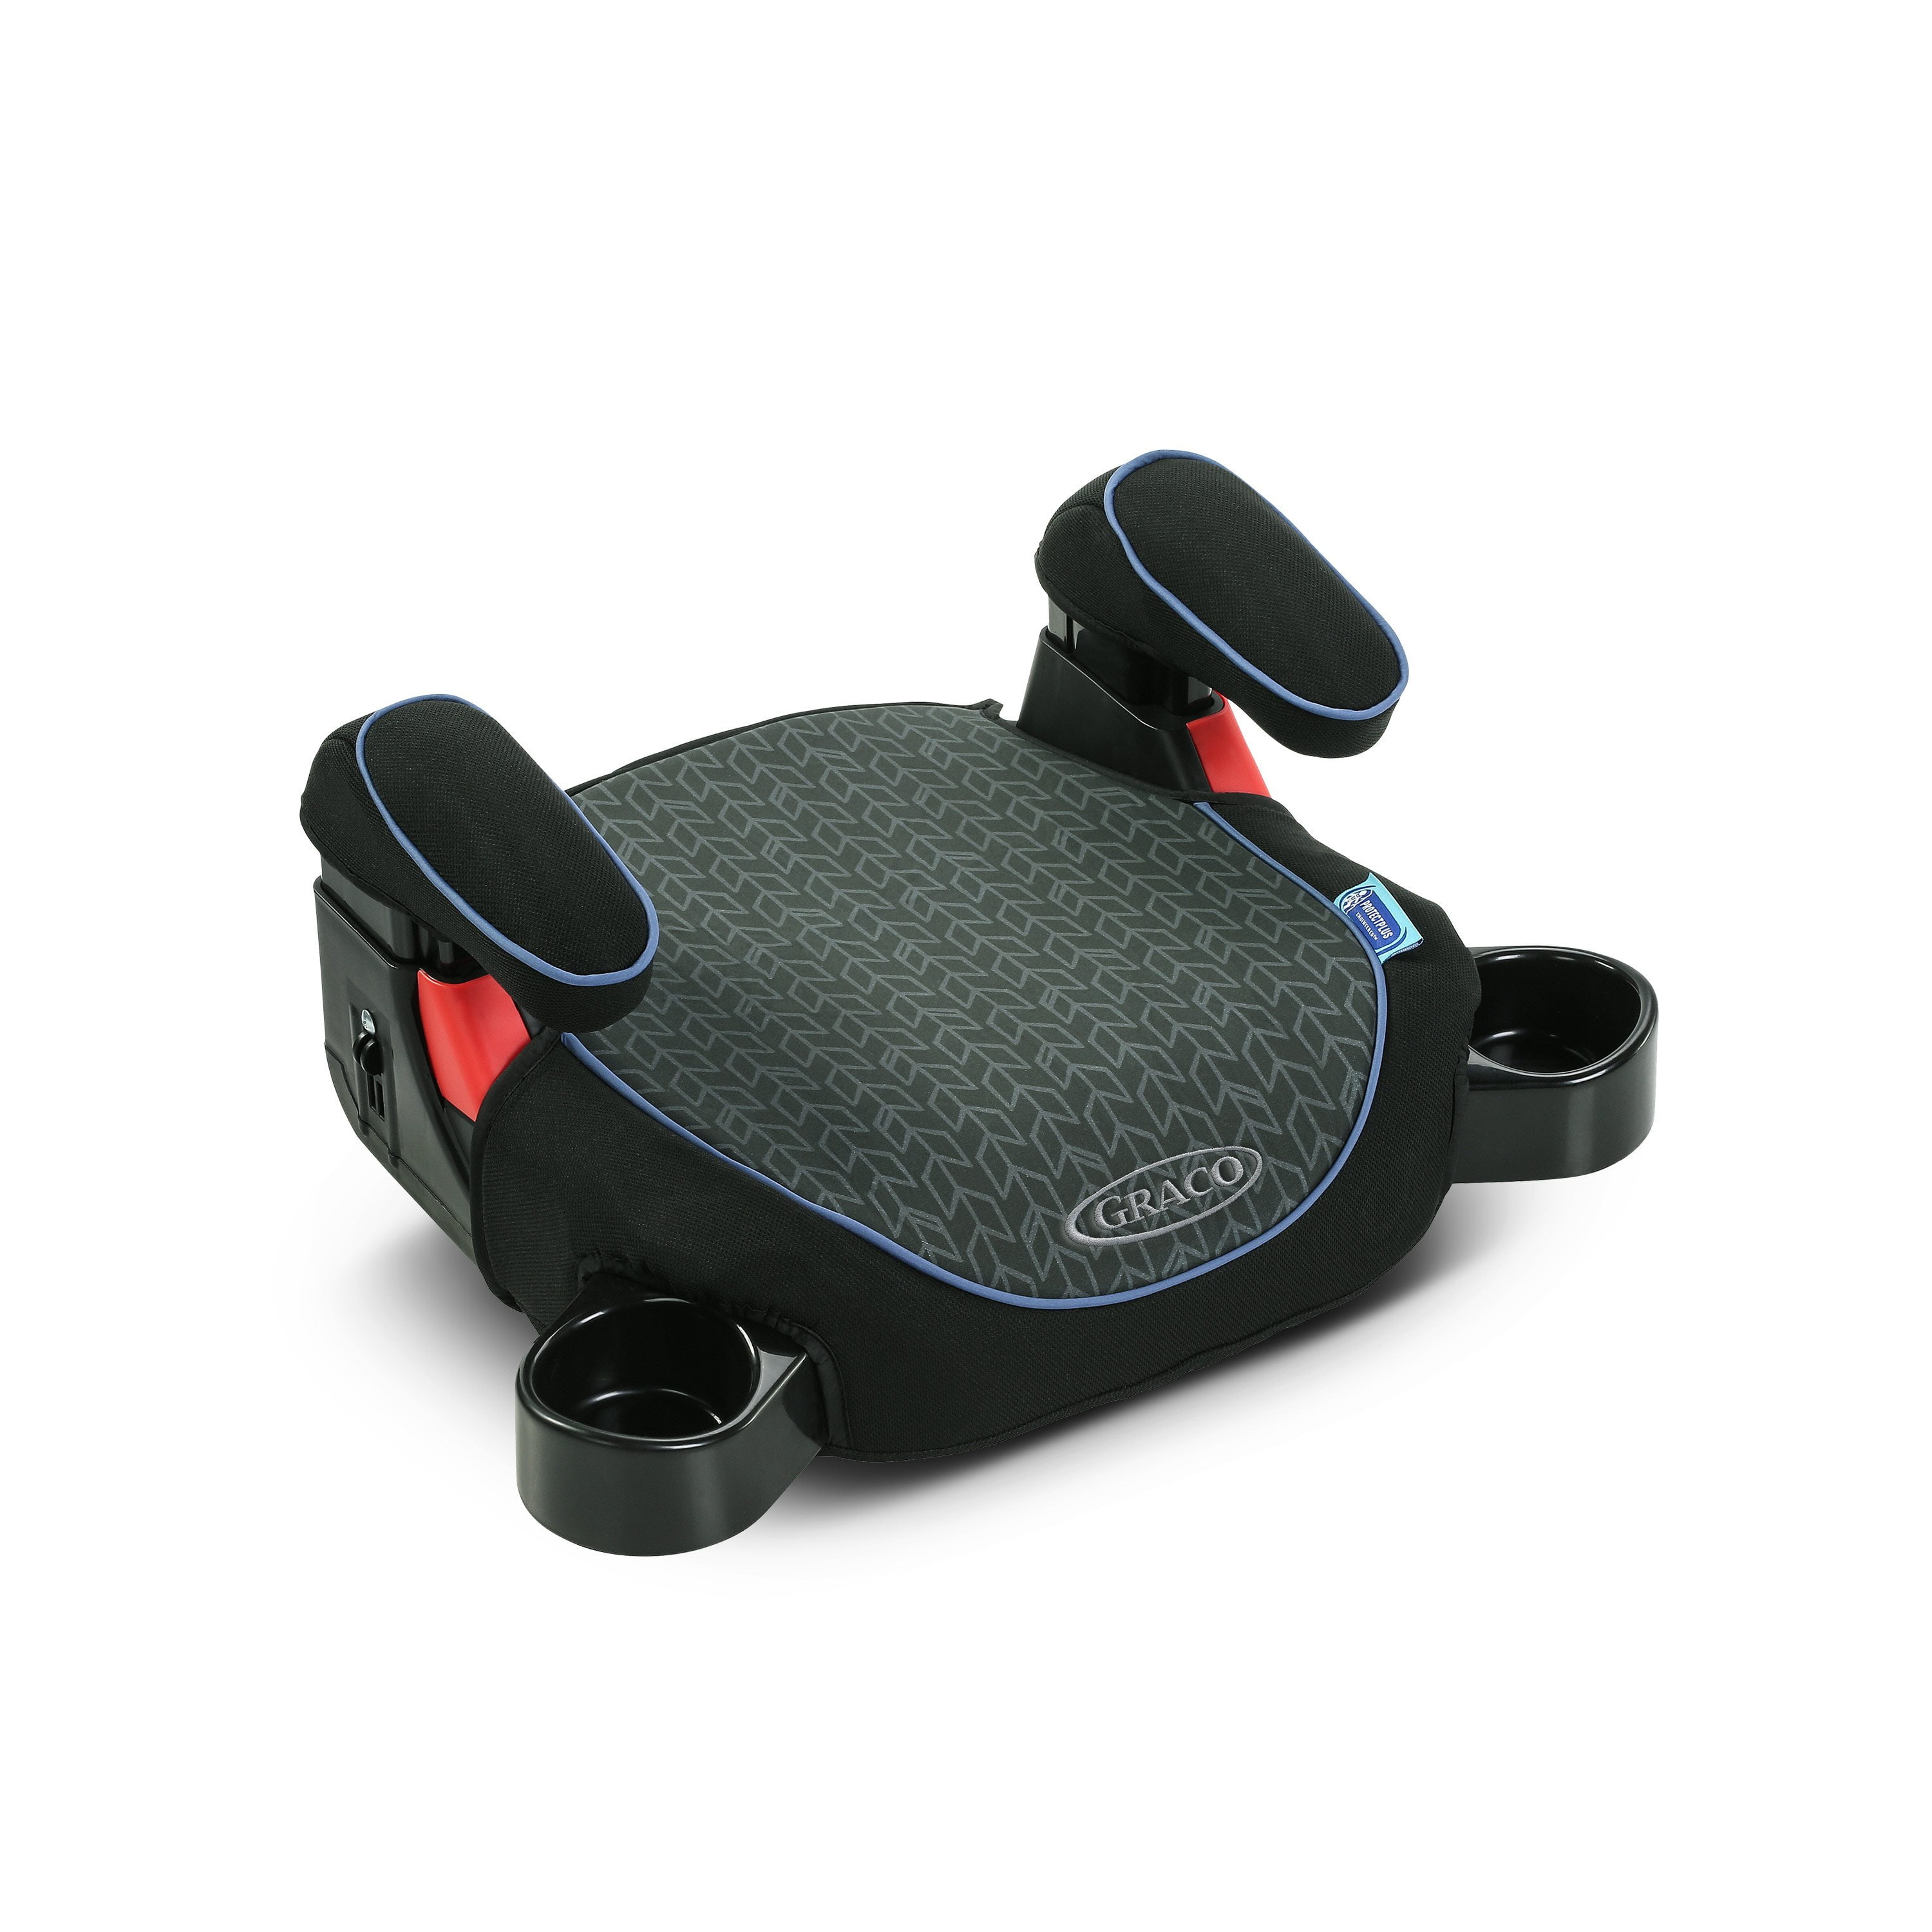 Graco Turbobooster Backless Forward Facing Booster Car Seat, Gust - image 1 of 9